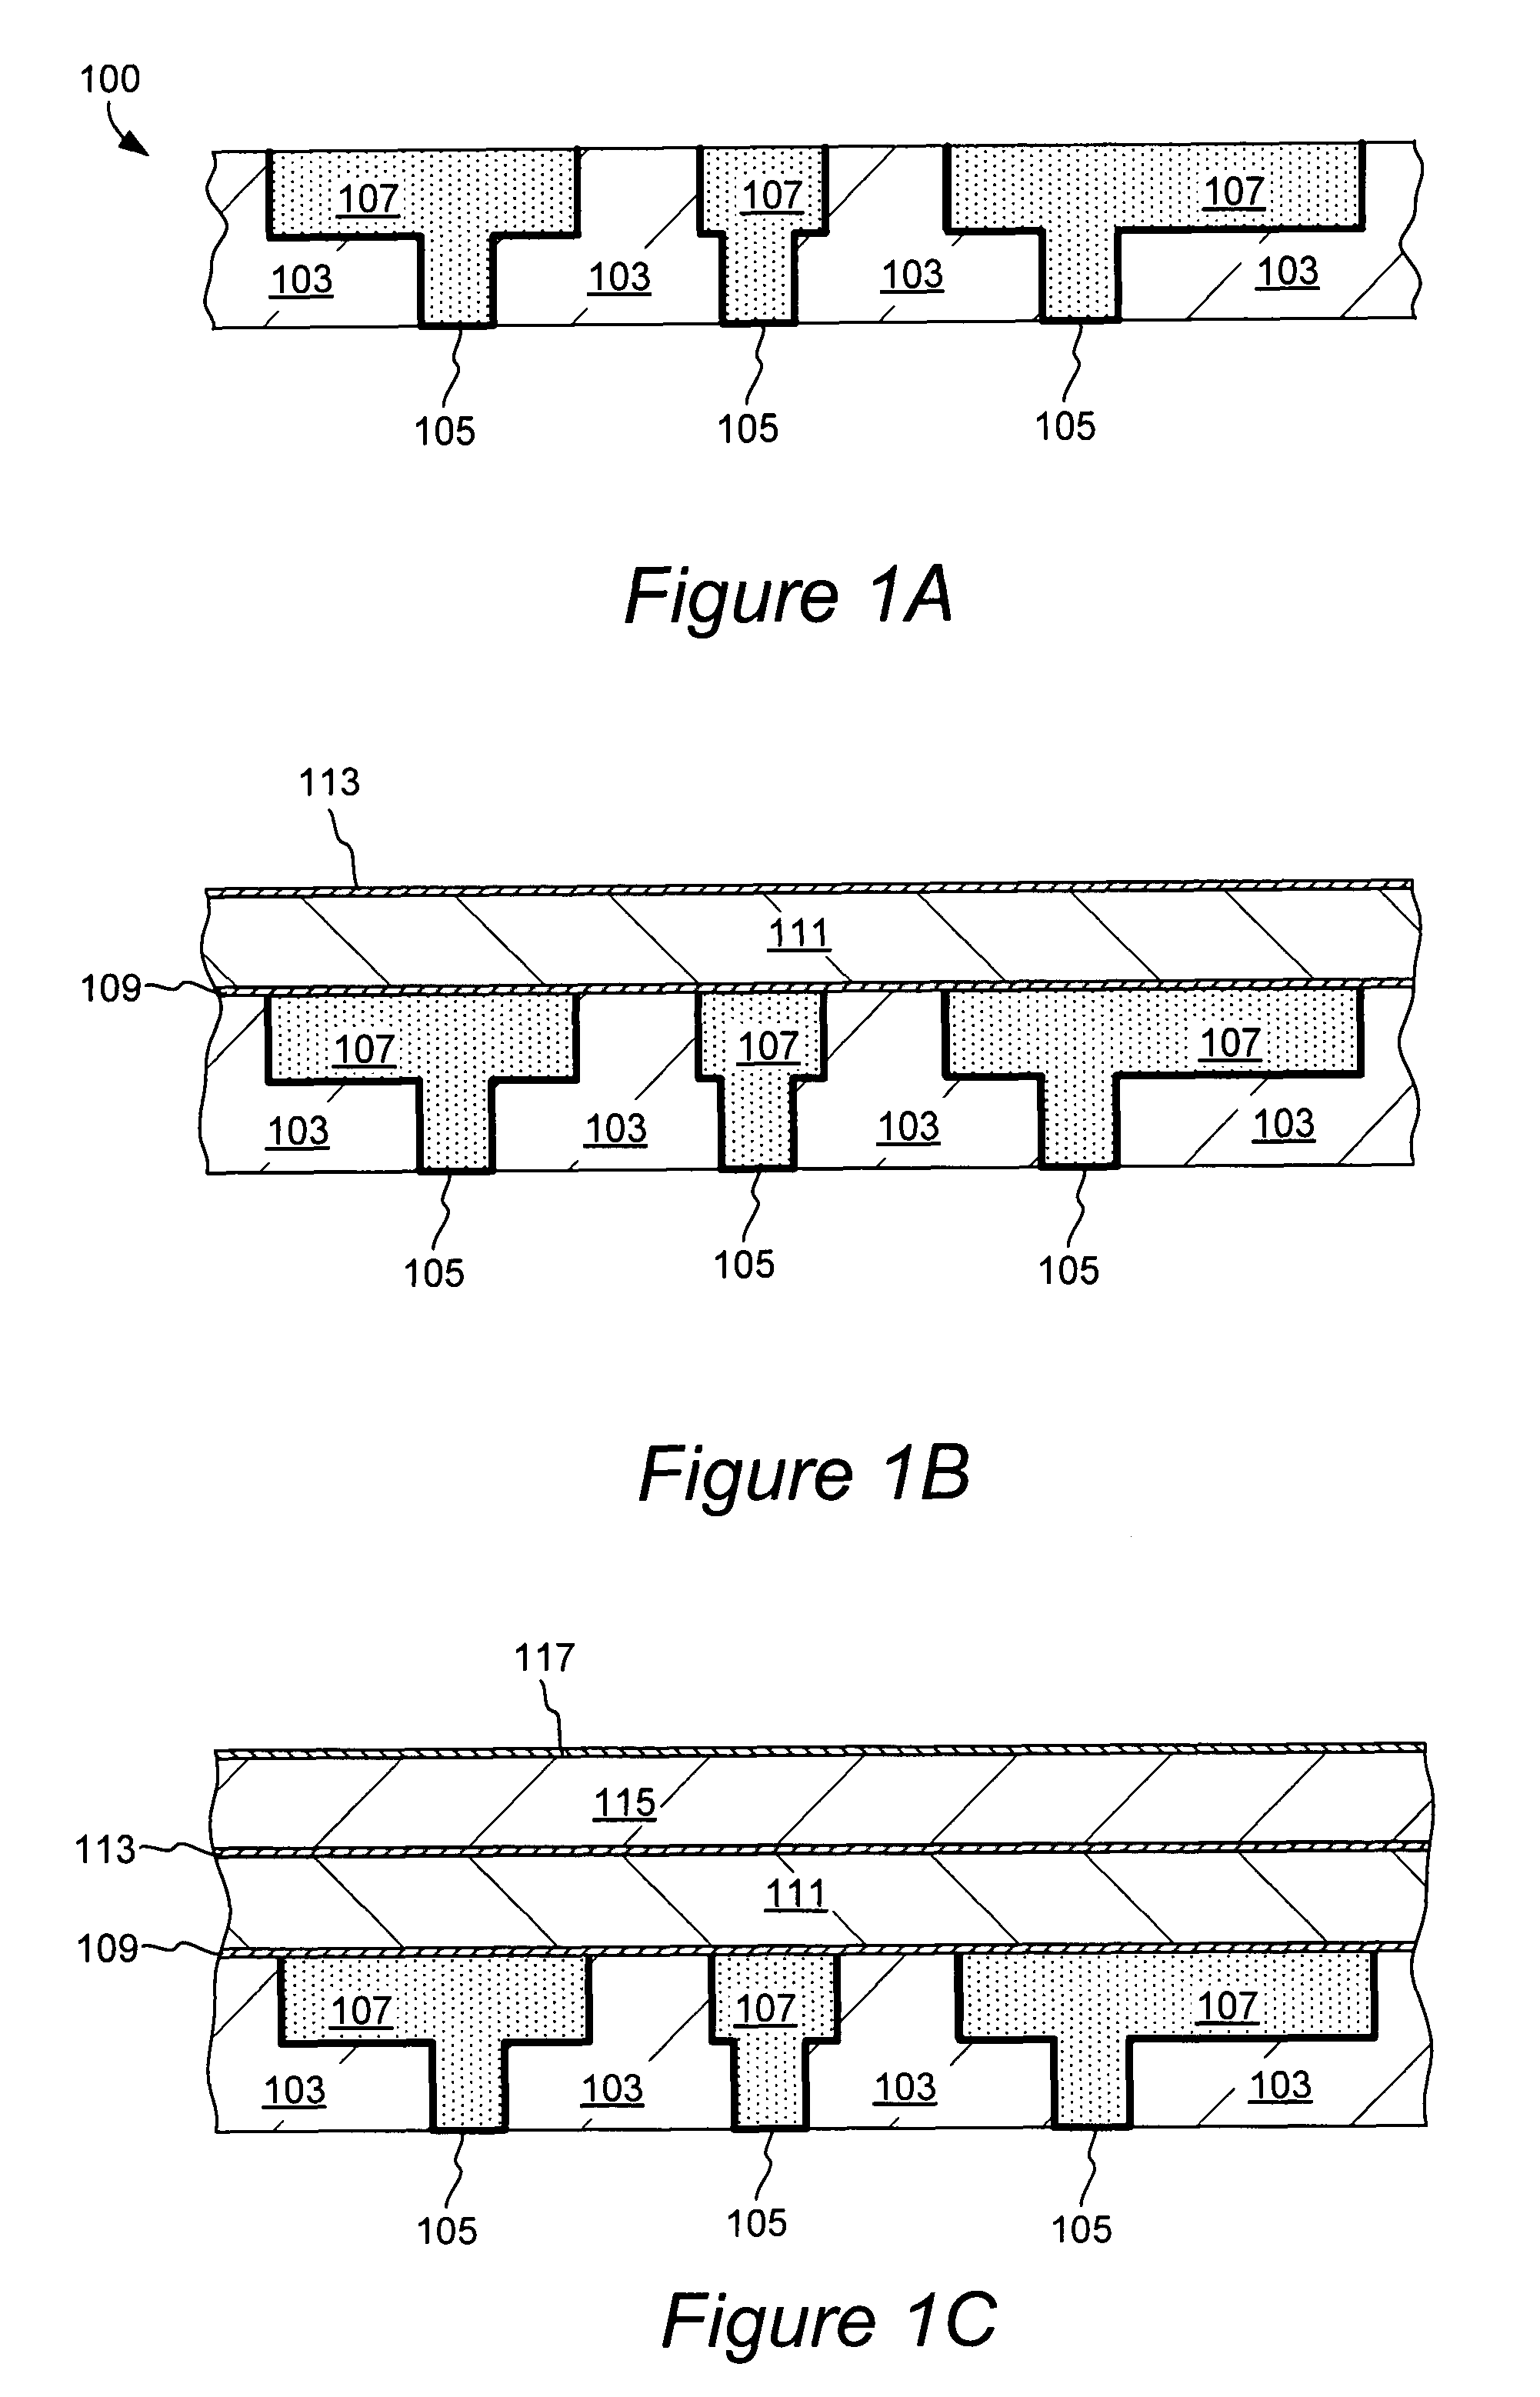 Methods and apparatus for engineering an interface between a diffusion barrier layer and a seed layer